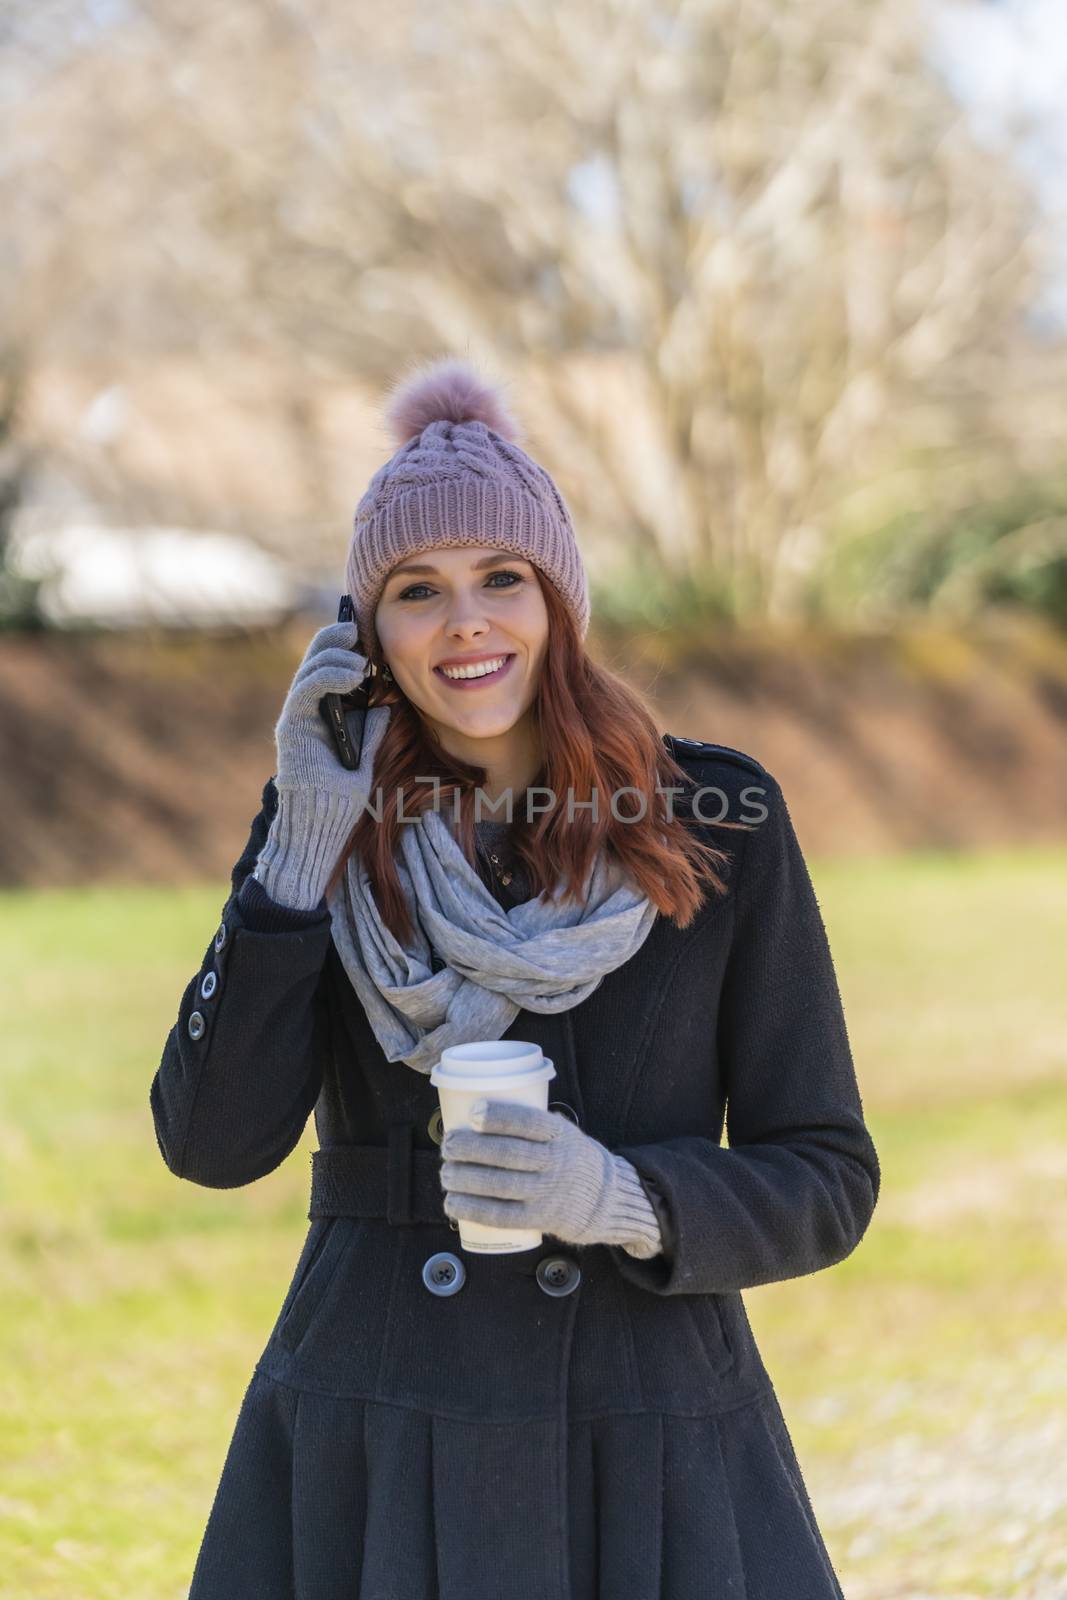 A Lovely Blonde Model Enjoys An Winters Day Outdoors While Drinking Her Favorite Drink And Talking On Her Cellphone by actionsports